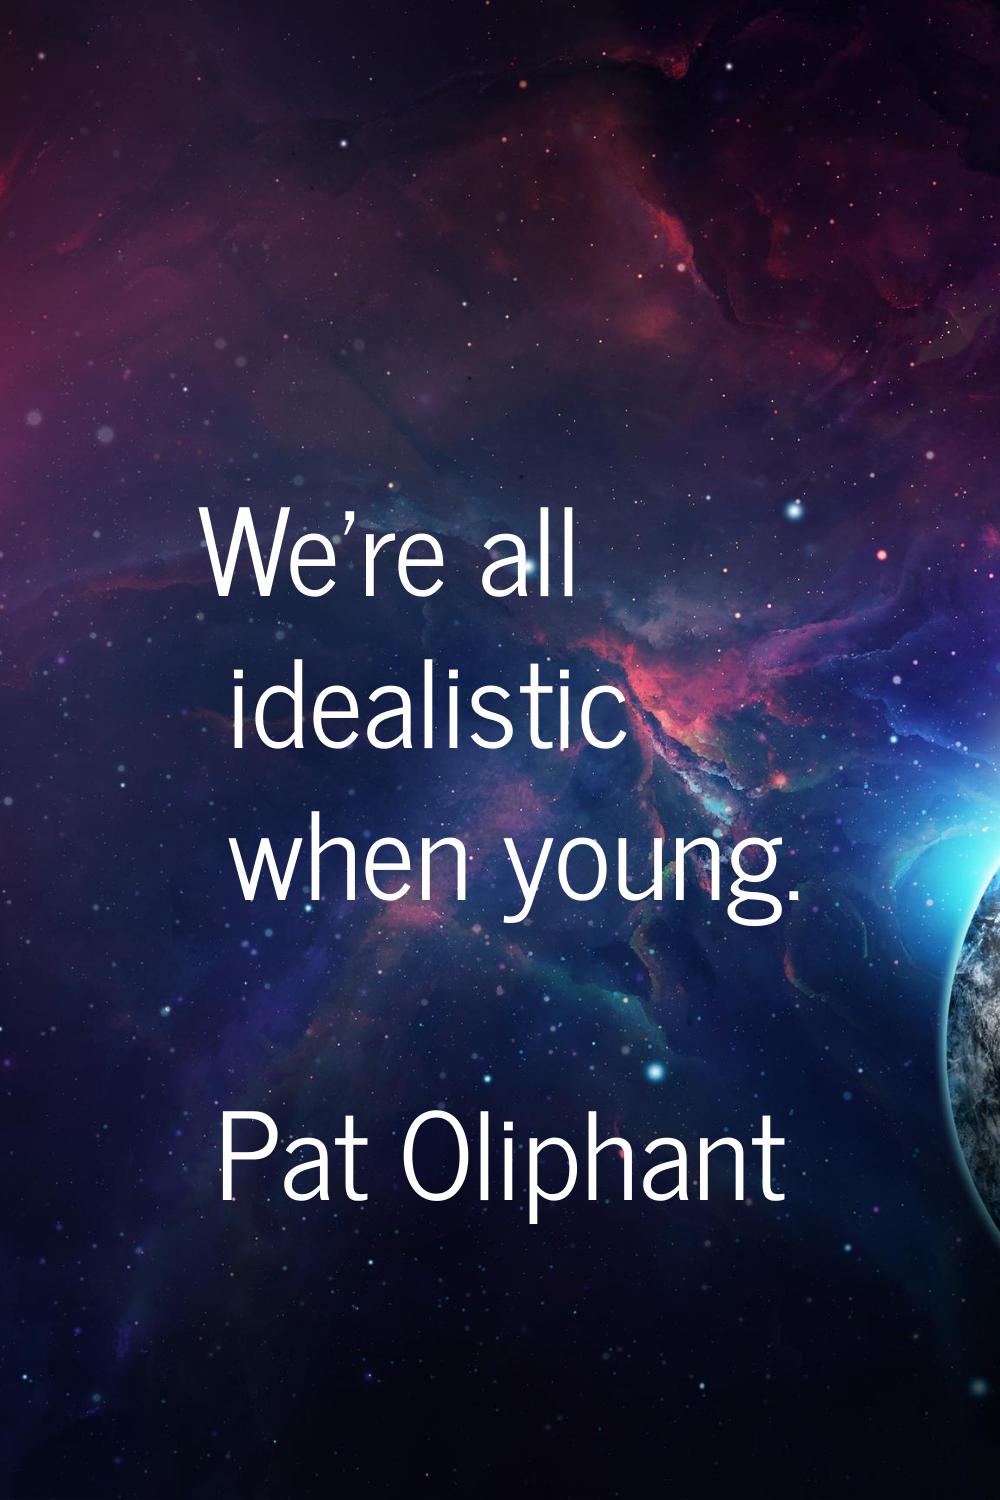 We're all idealistic when young.